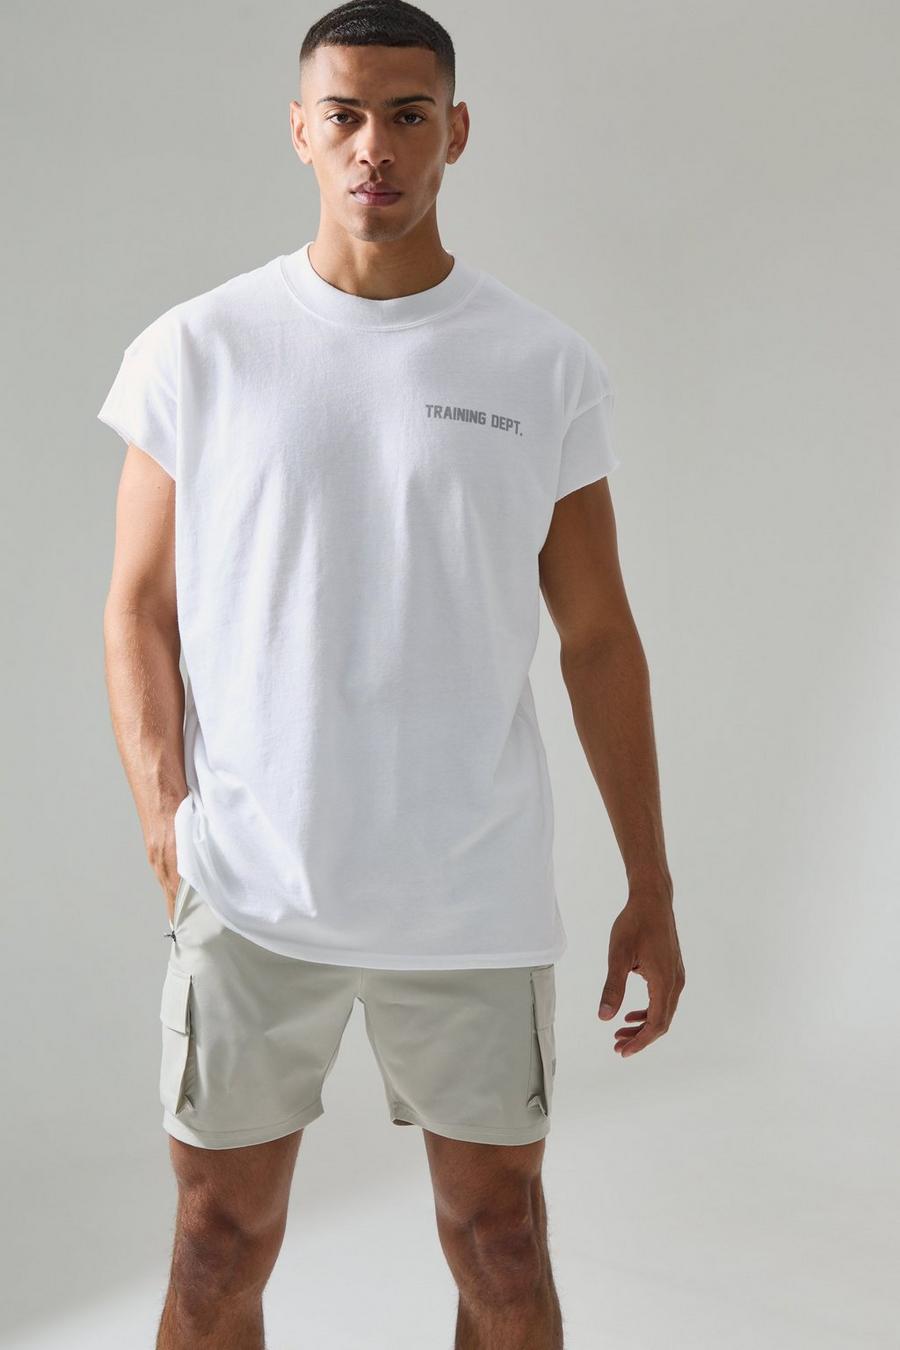 Active Training Dept Oversized Extended Neck Cut Off T-shirt, White image number 1